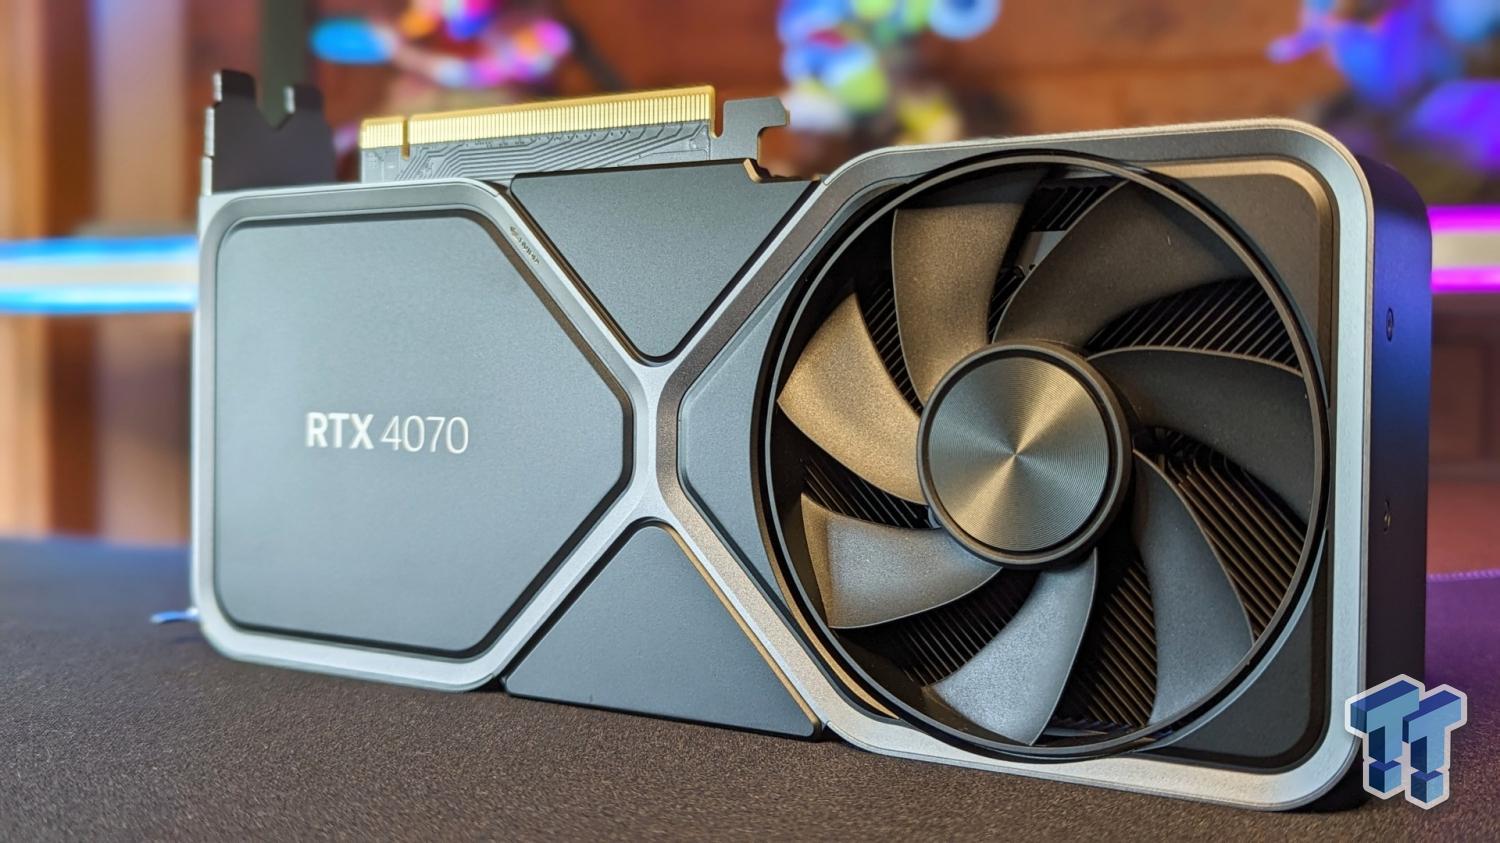 Nvidia RTX 4070 Founders Edition review: An RTX 3080 with benefits